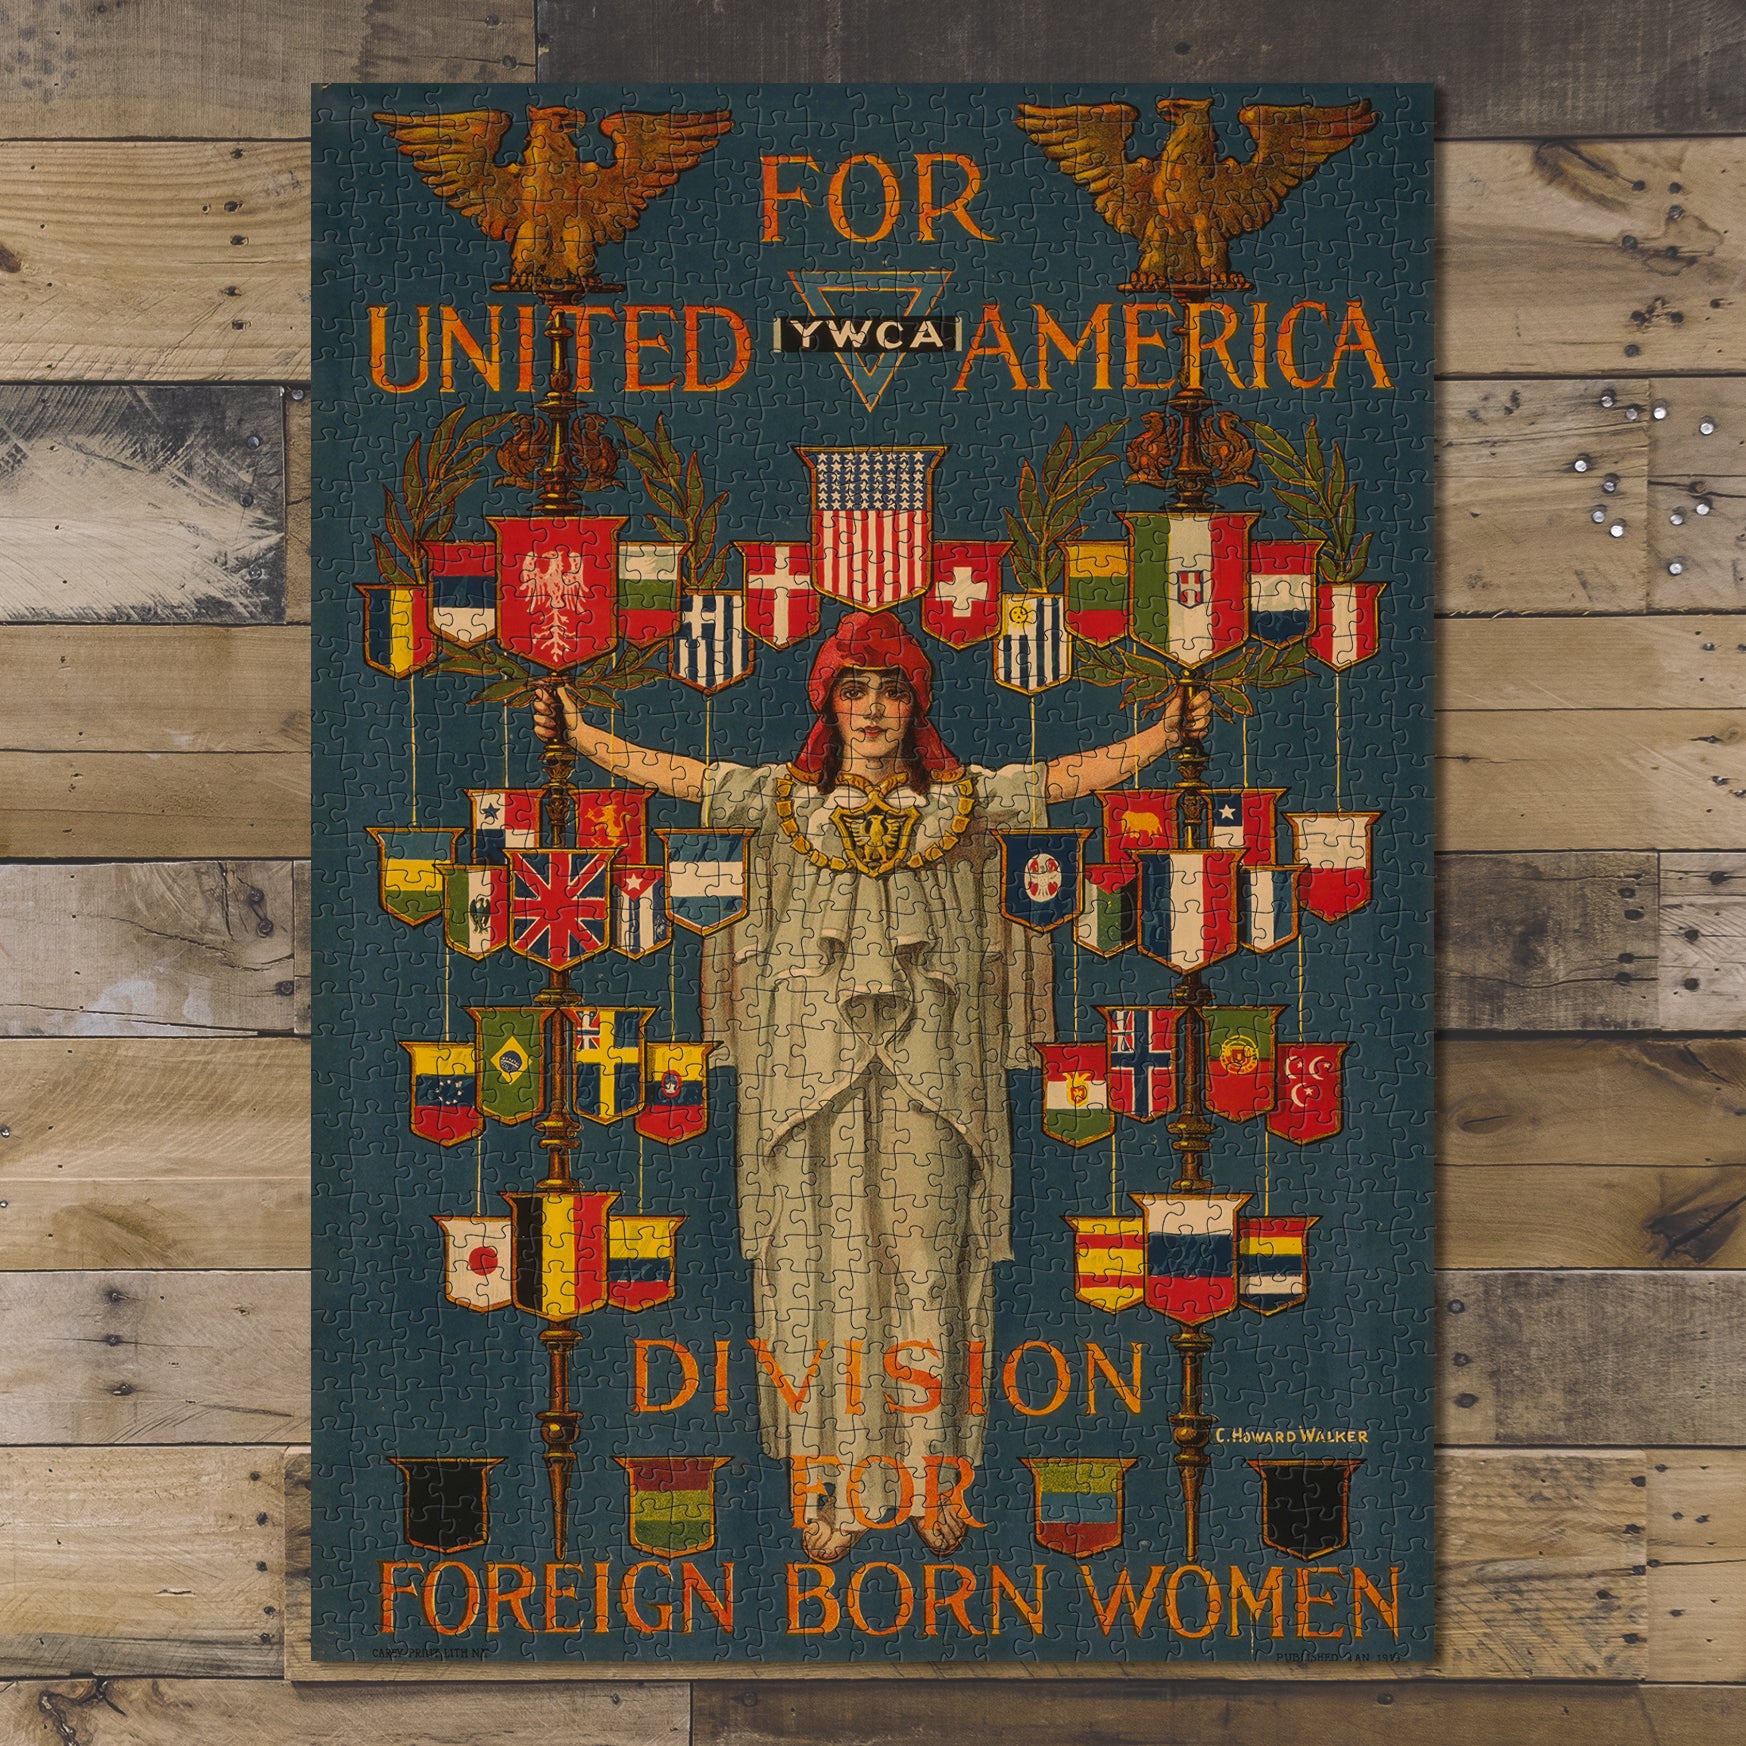 1000 piece puzzle 1919 Photo: World War I For United America YWCA Division for Foreign Born Women